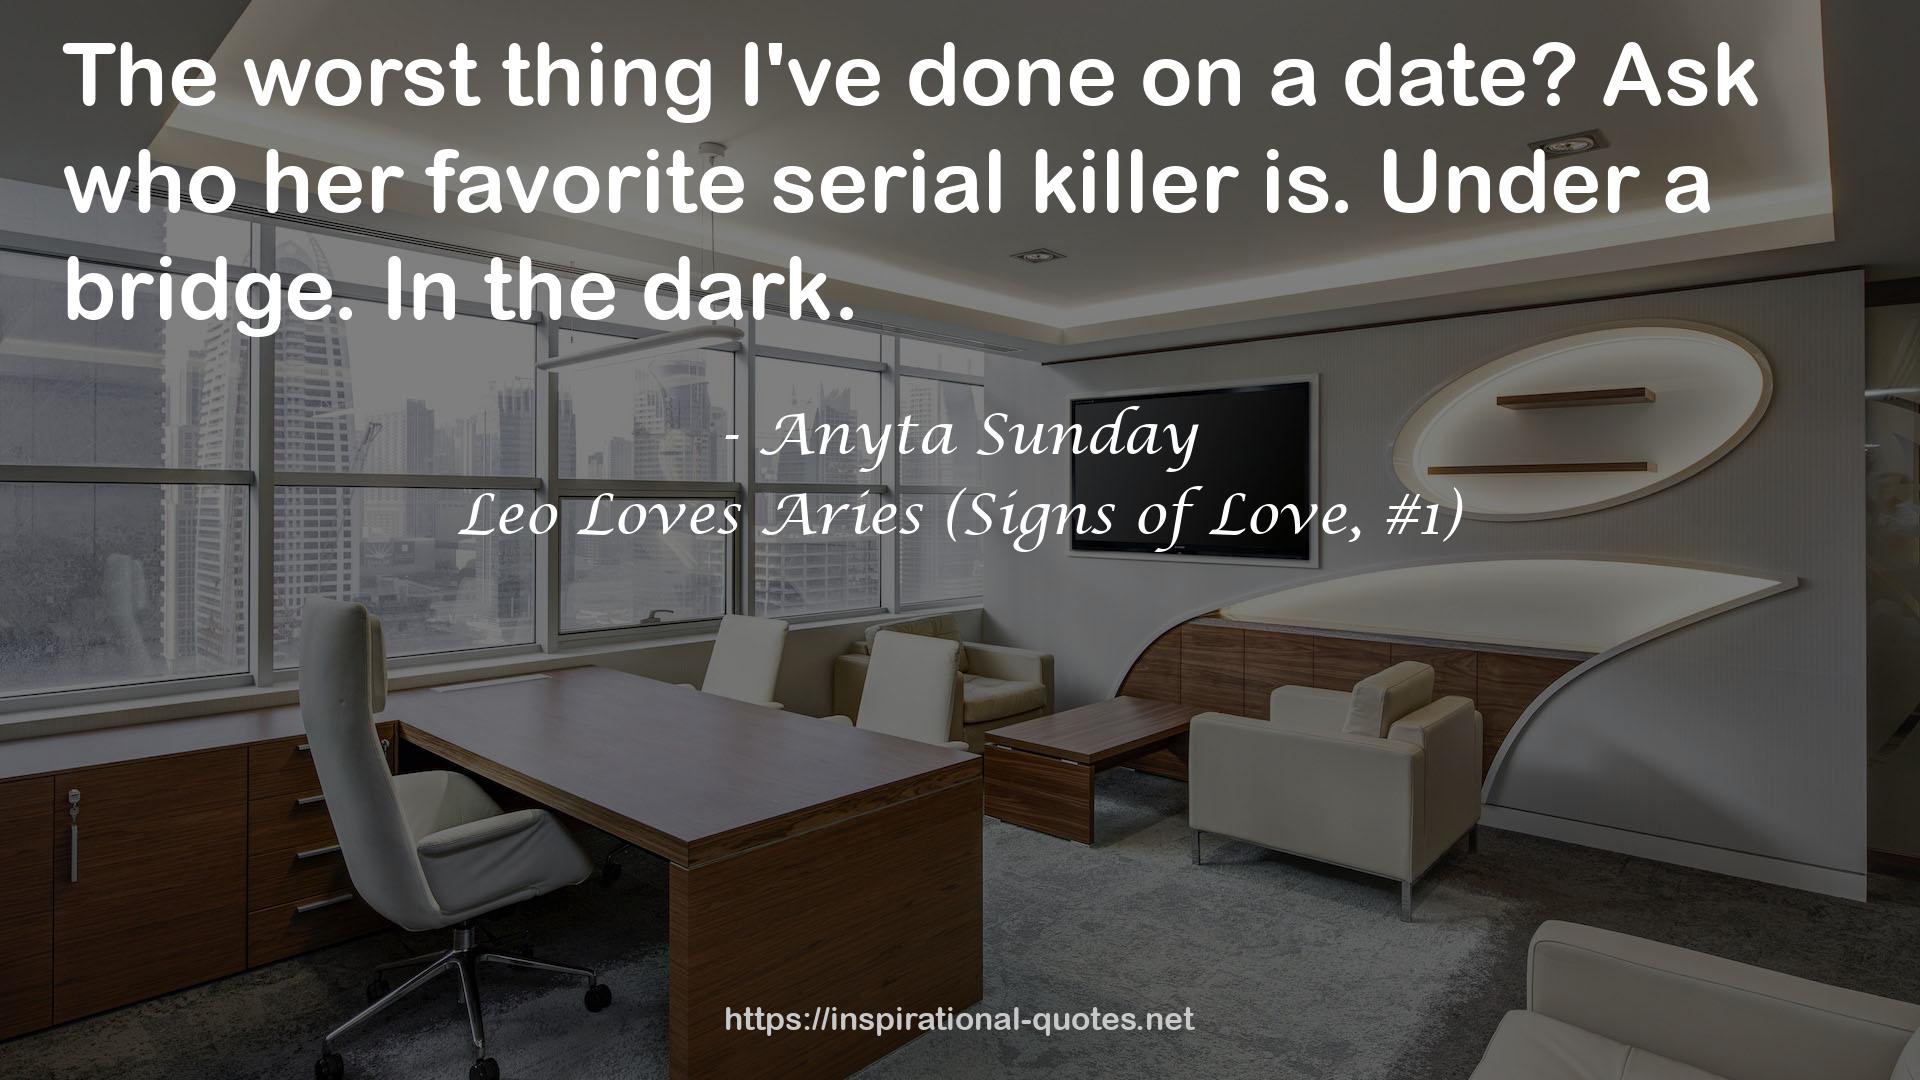 Leo Loves Aries (Signs of Love, #1) QUOTES